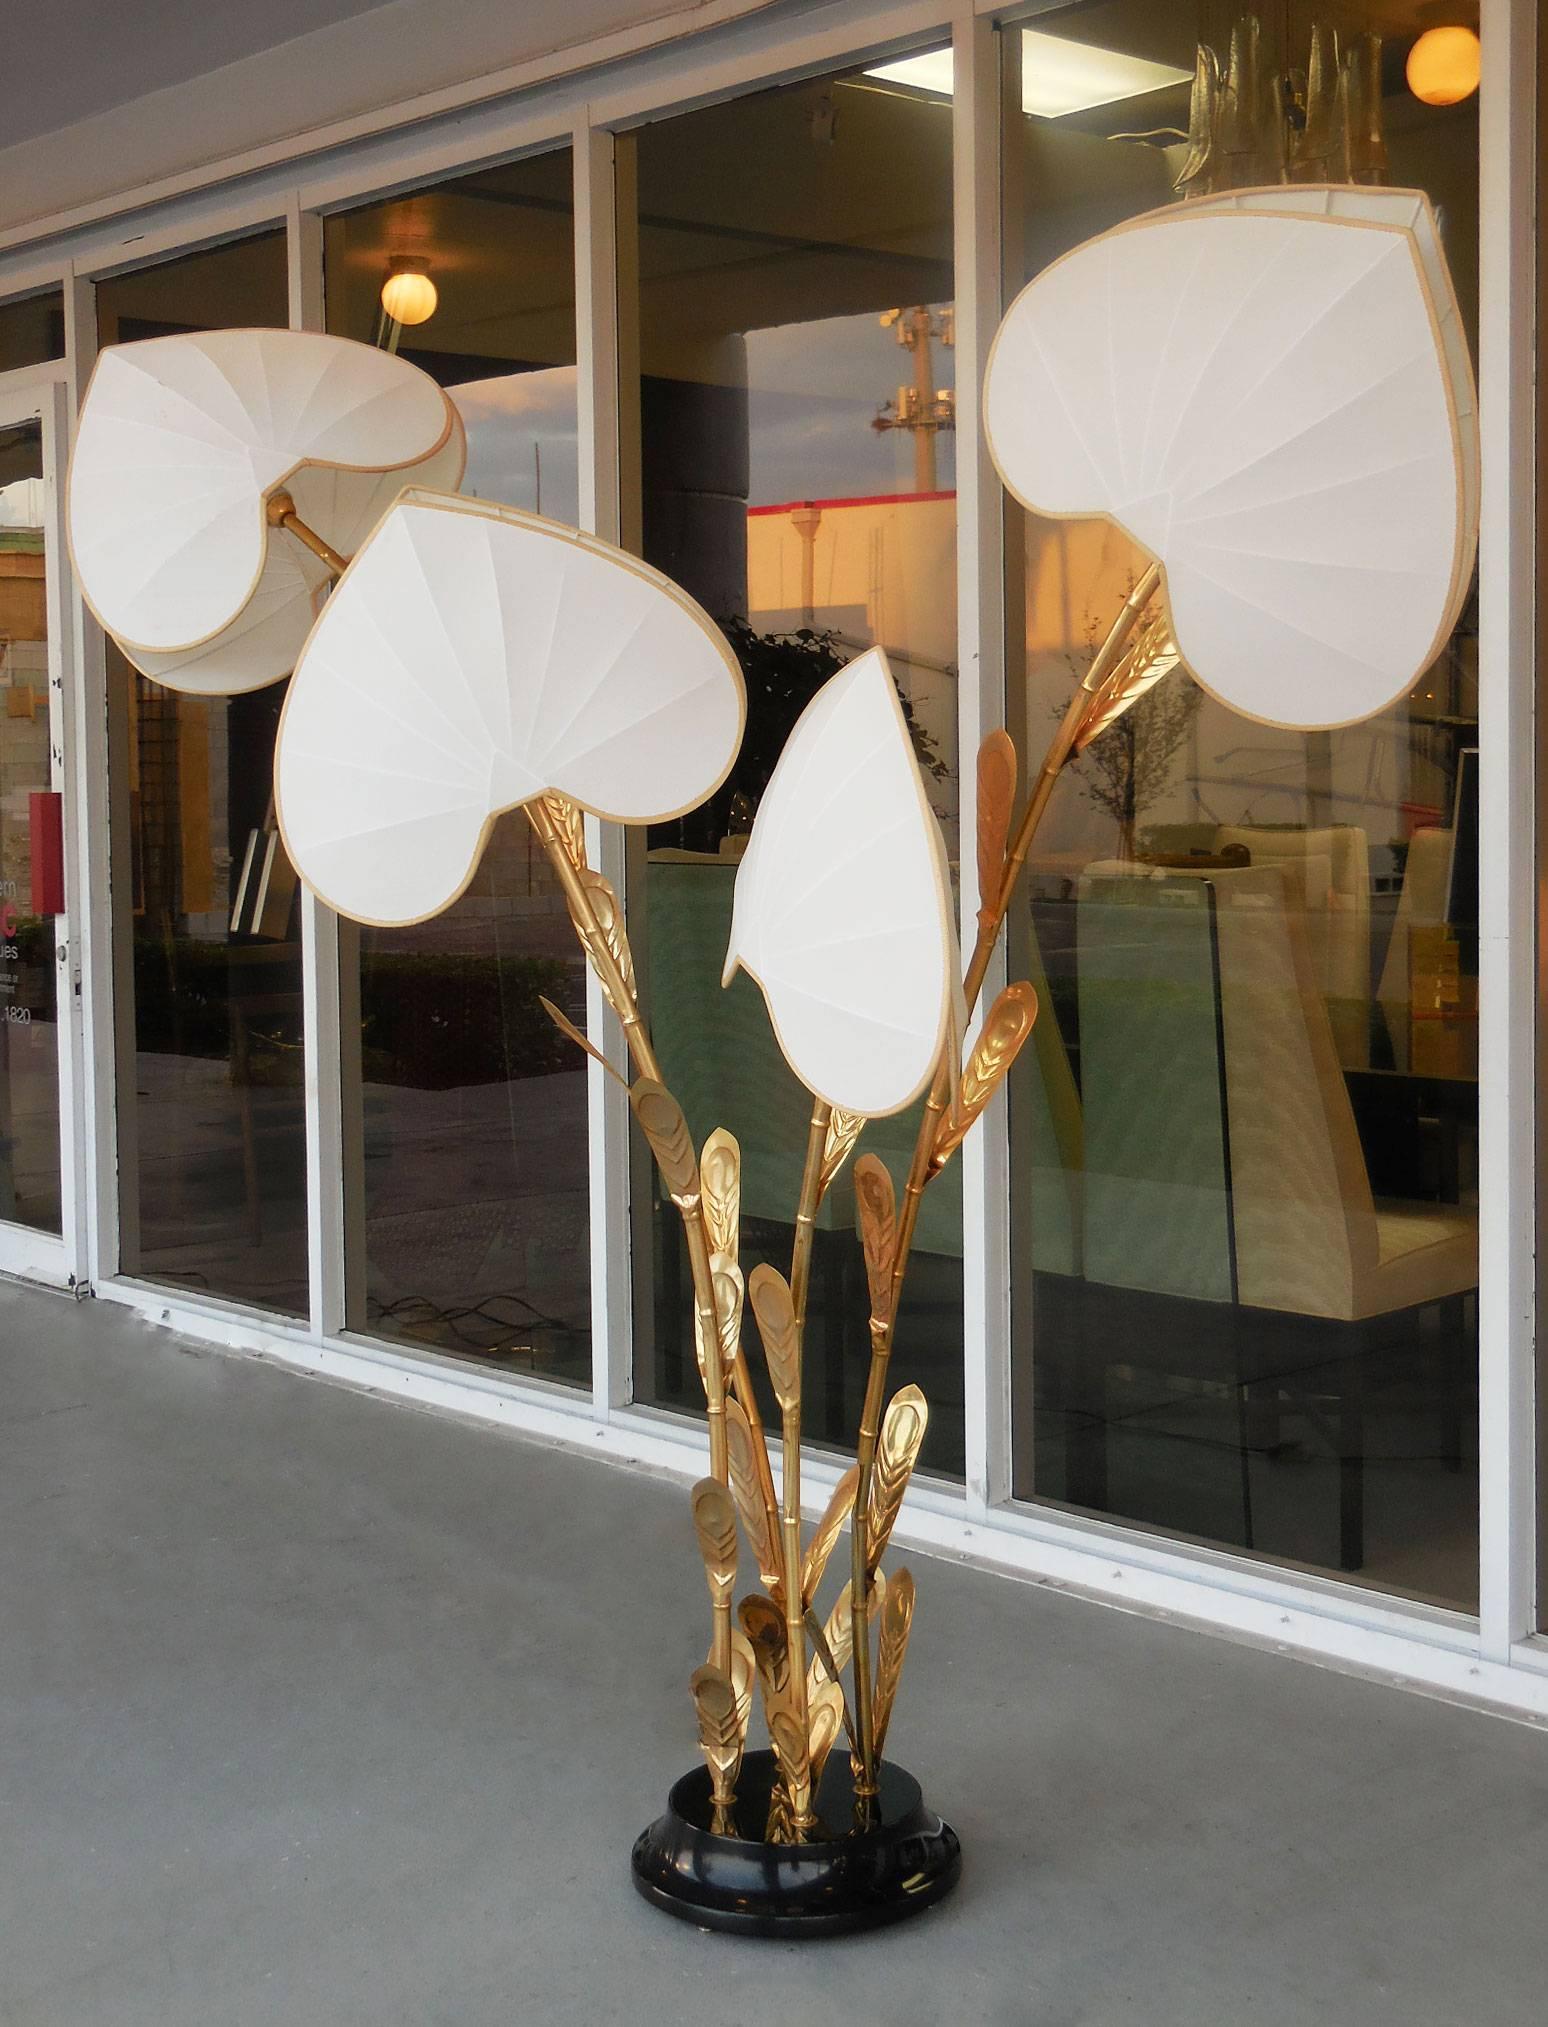 Amazing Italian floor lamp. Gilt metal stems with leaves. Original double fabric shades conceal the light source. On a Bakelite base, signed with the brass inset 